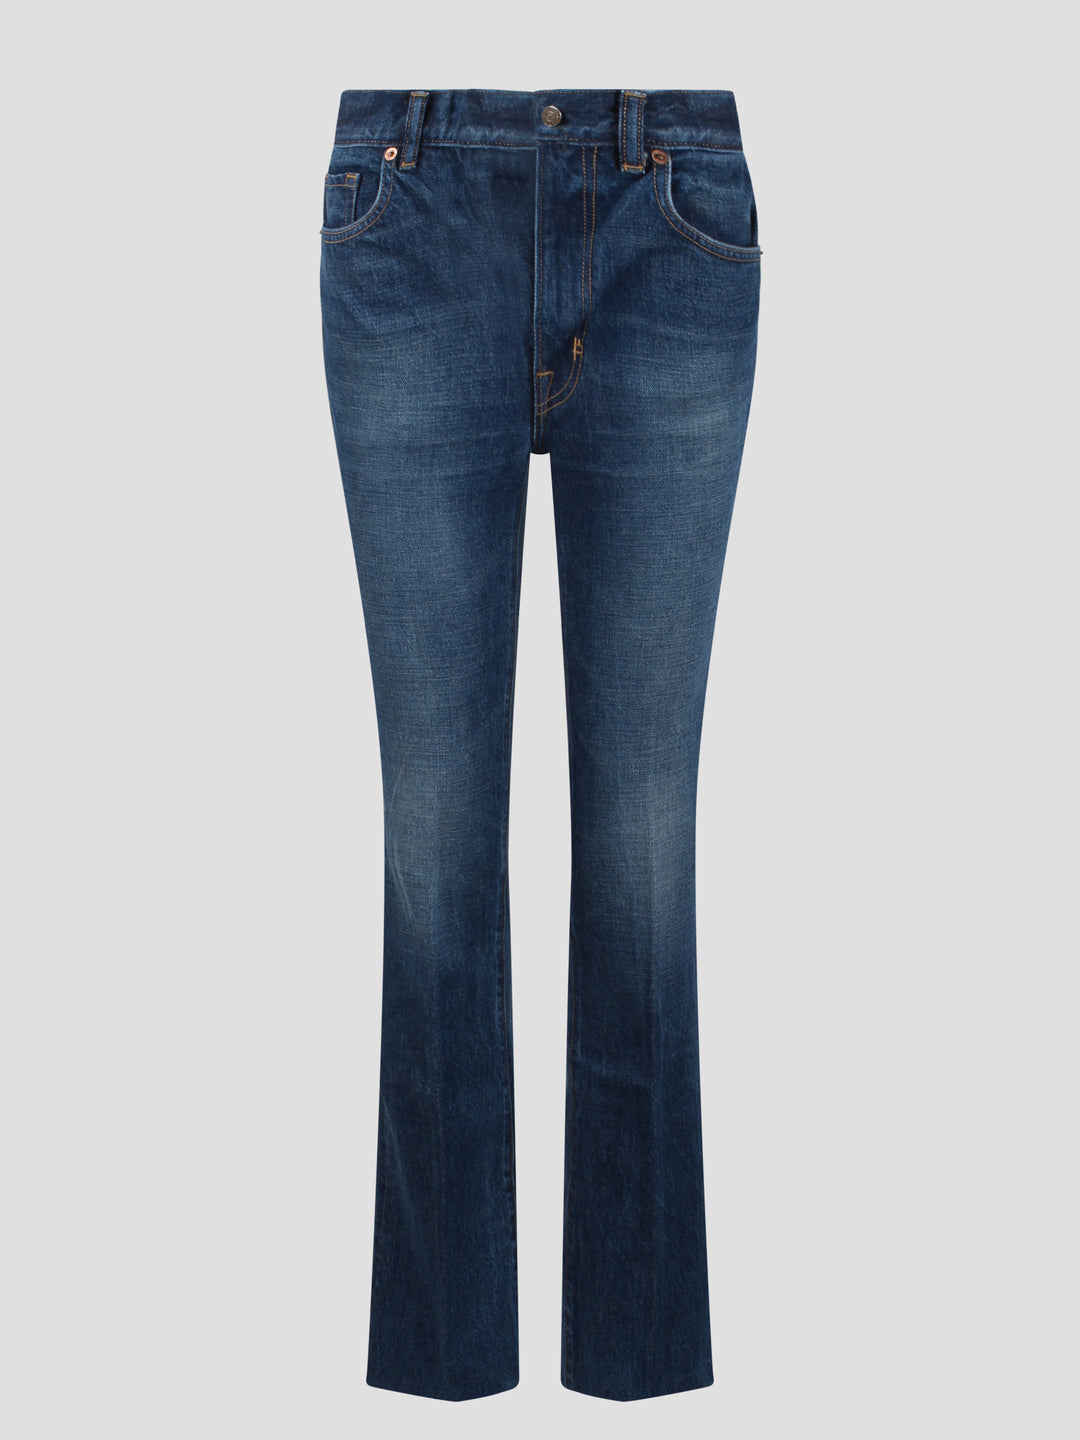 Stone washed denim straight fit jeans